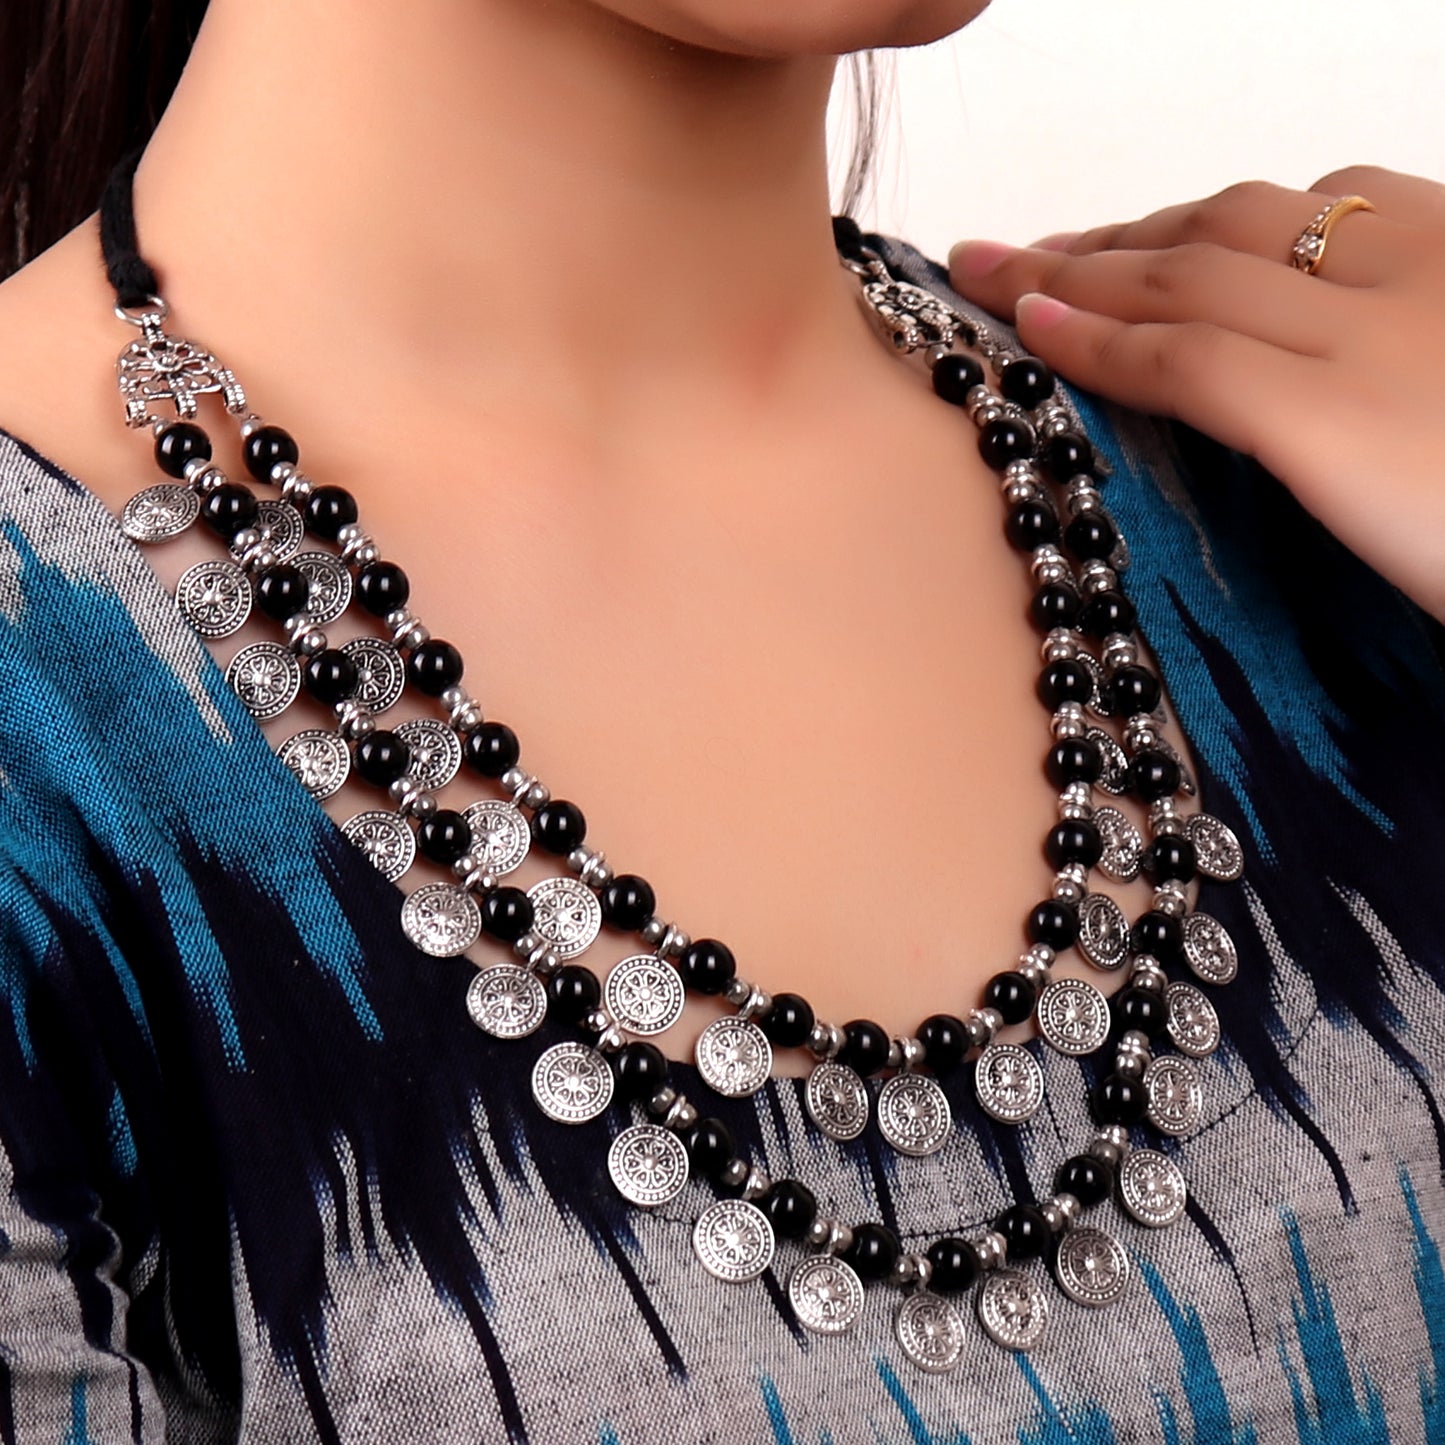 Necklace,Layered Necklace with Black Beads - Cippele Multi Store